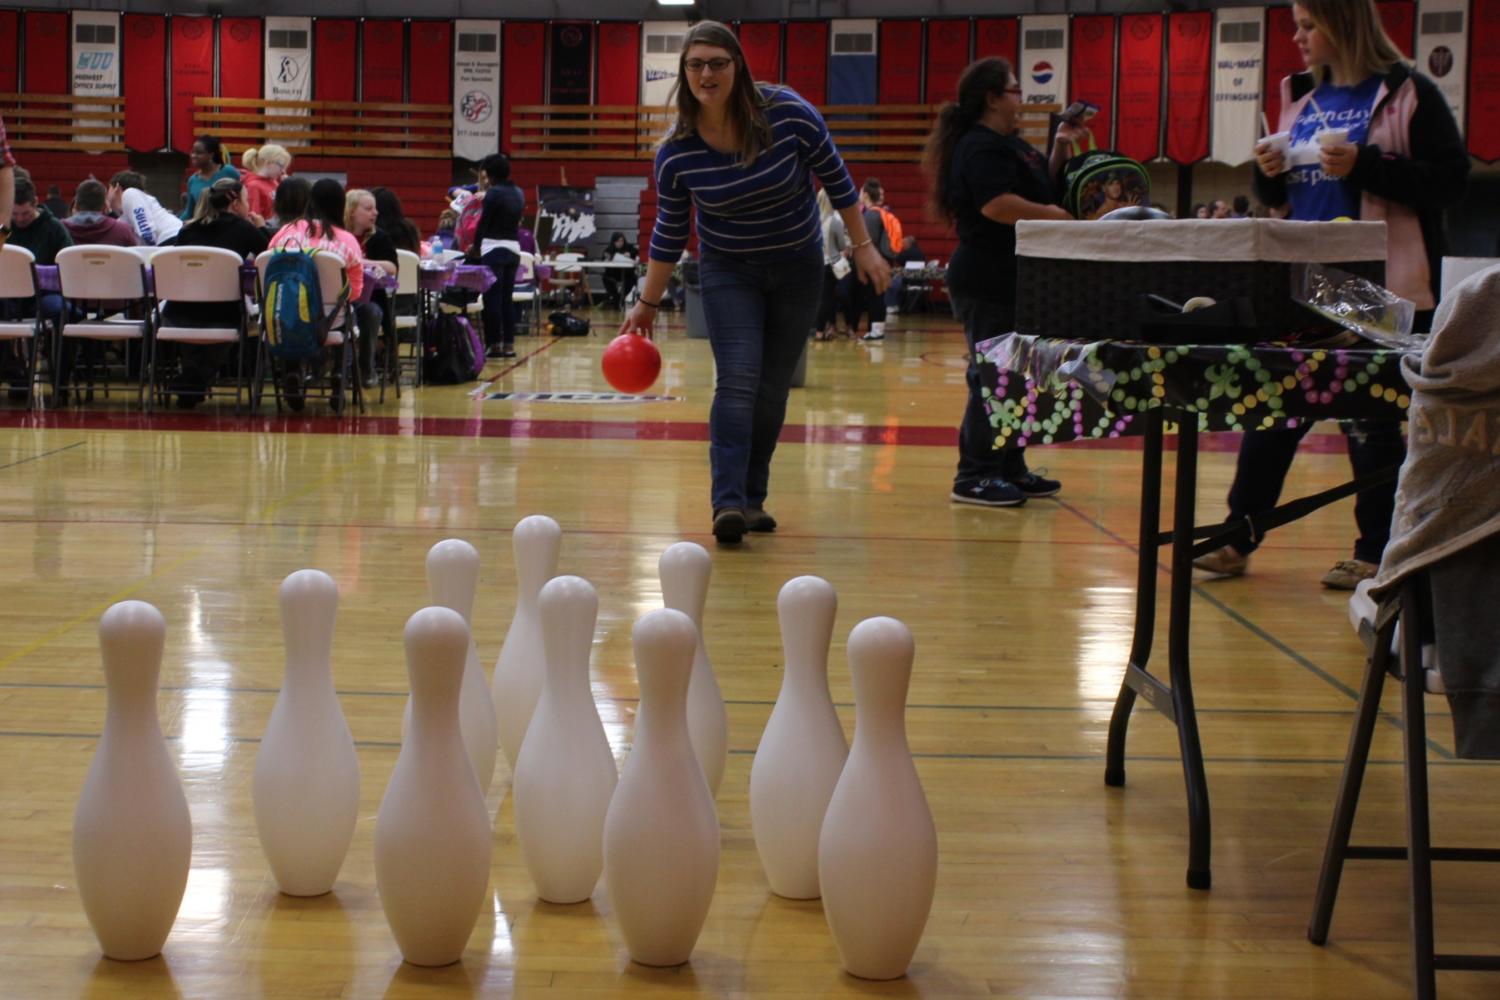 LLC student Jenna Jenkins bowls for a prize at SABs Spring Carnival on May 3, 2017.